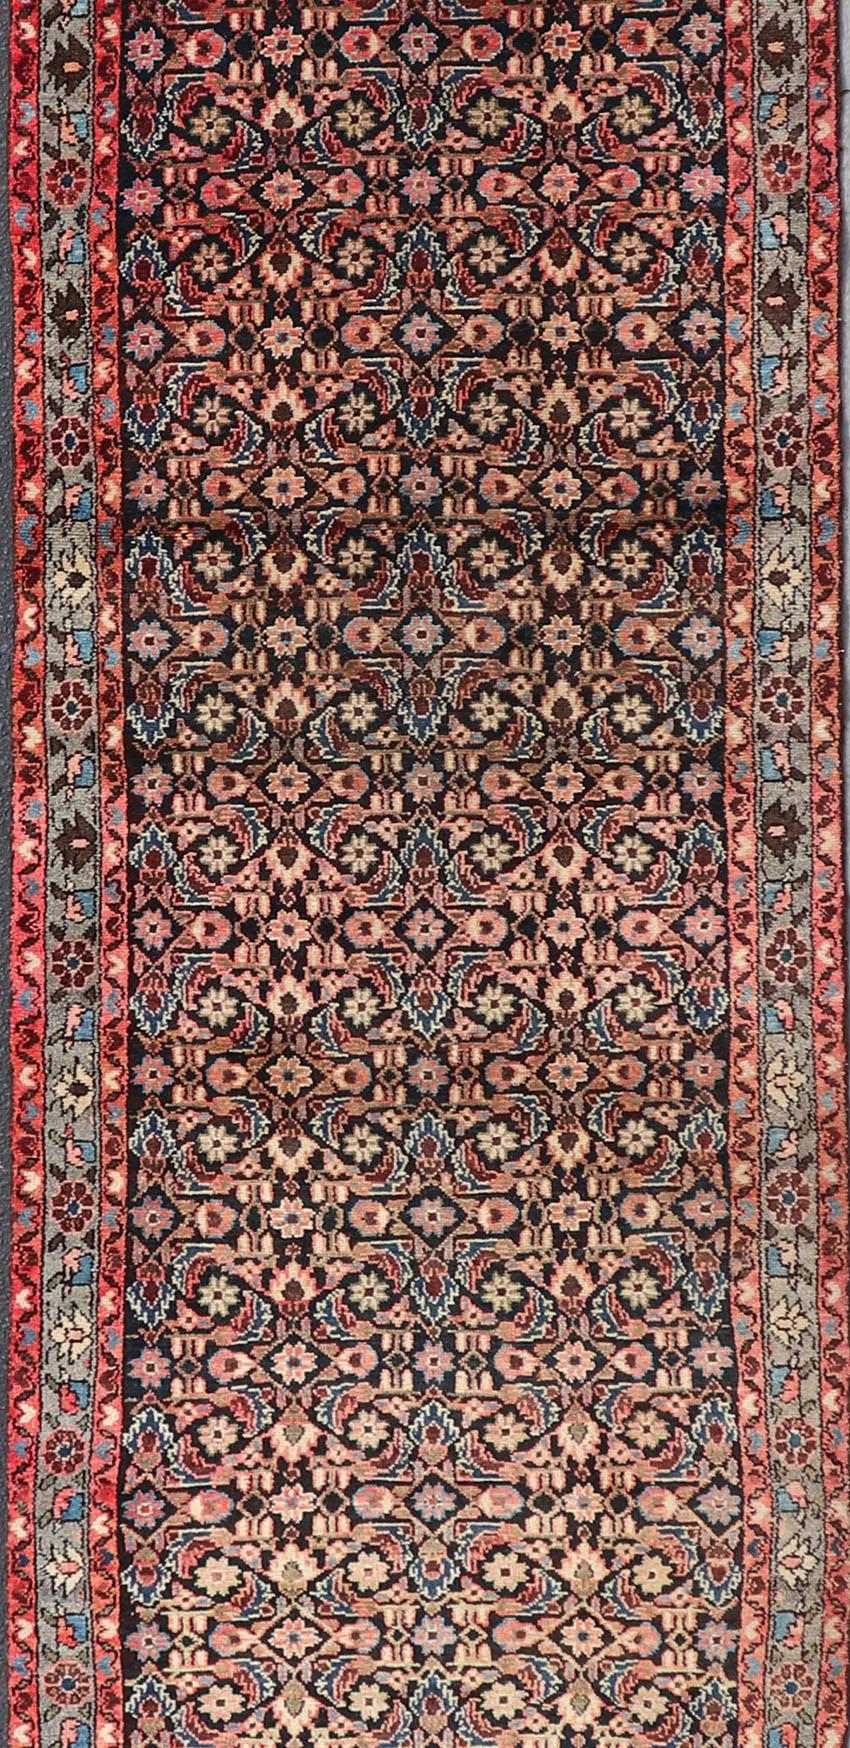 Hand-Knotted Long Multicolored Vintage Persian Malayer Runner Sub-Geometric Floral Design For Sale